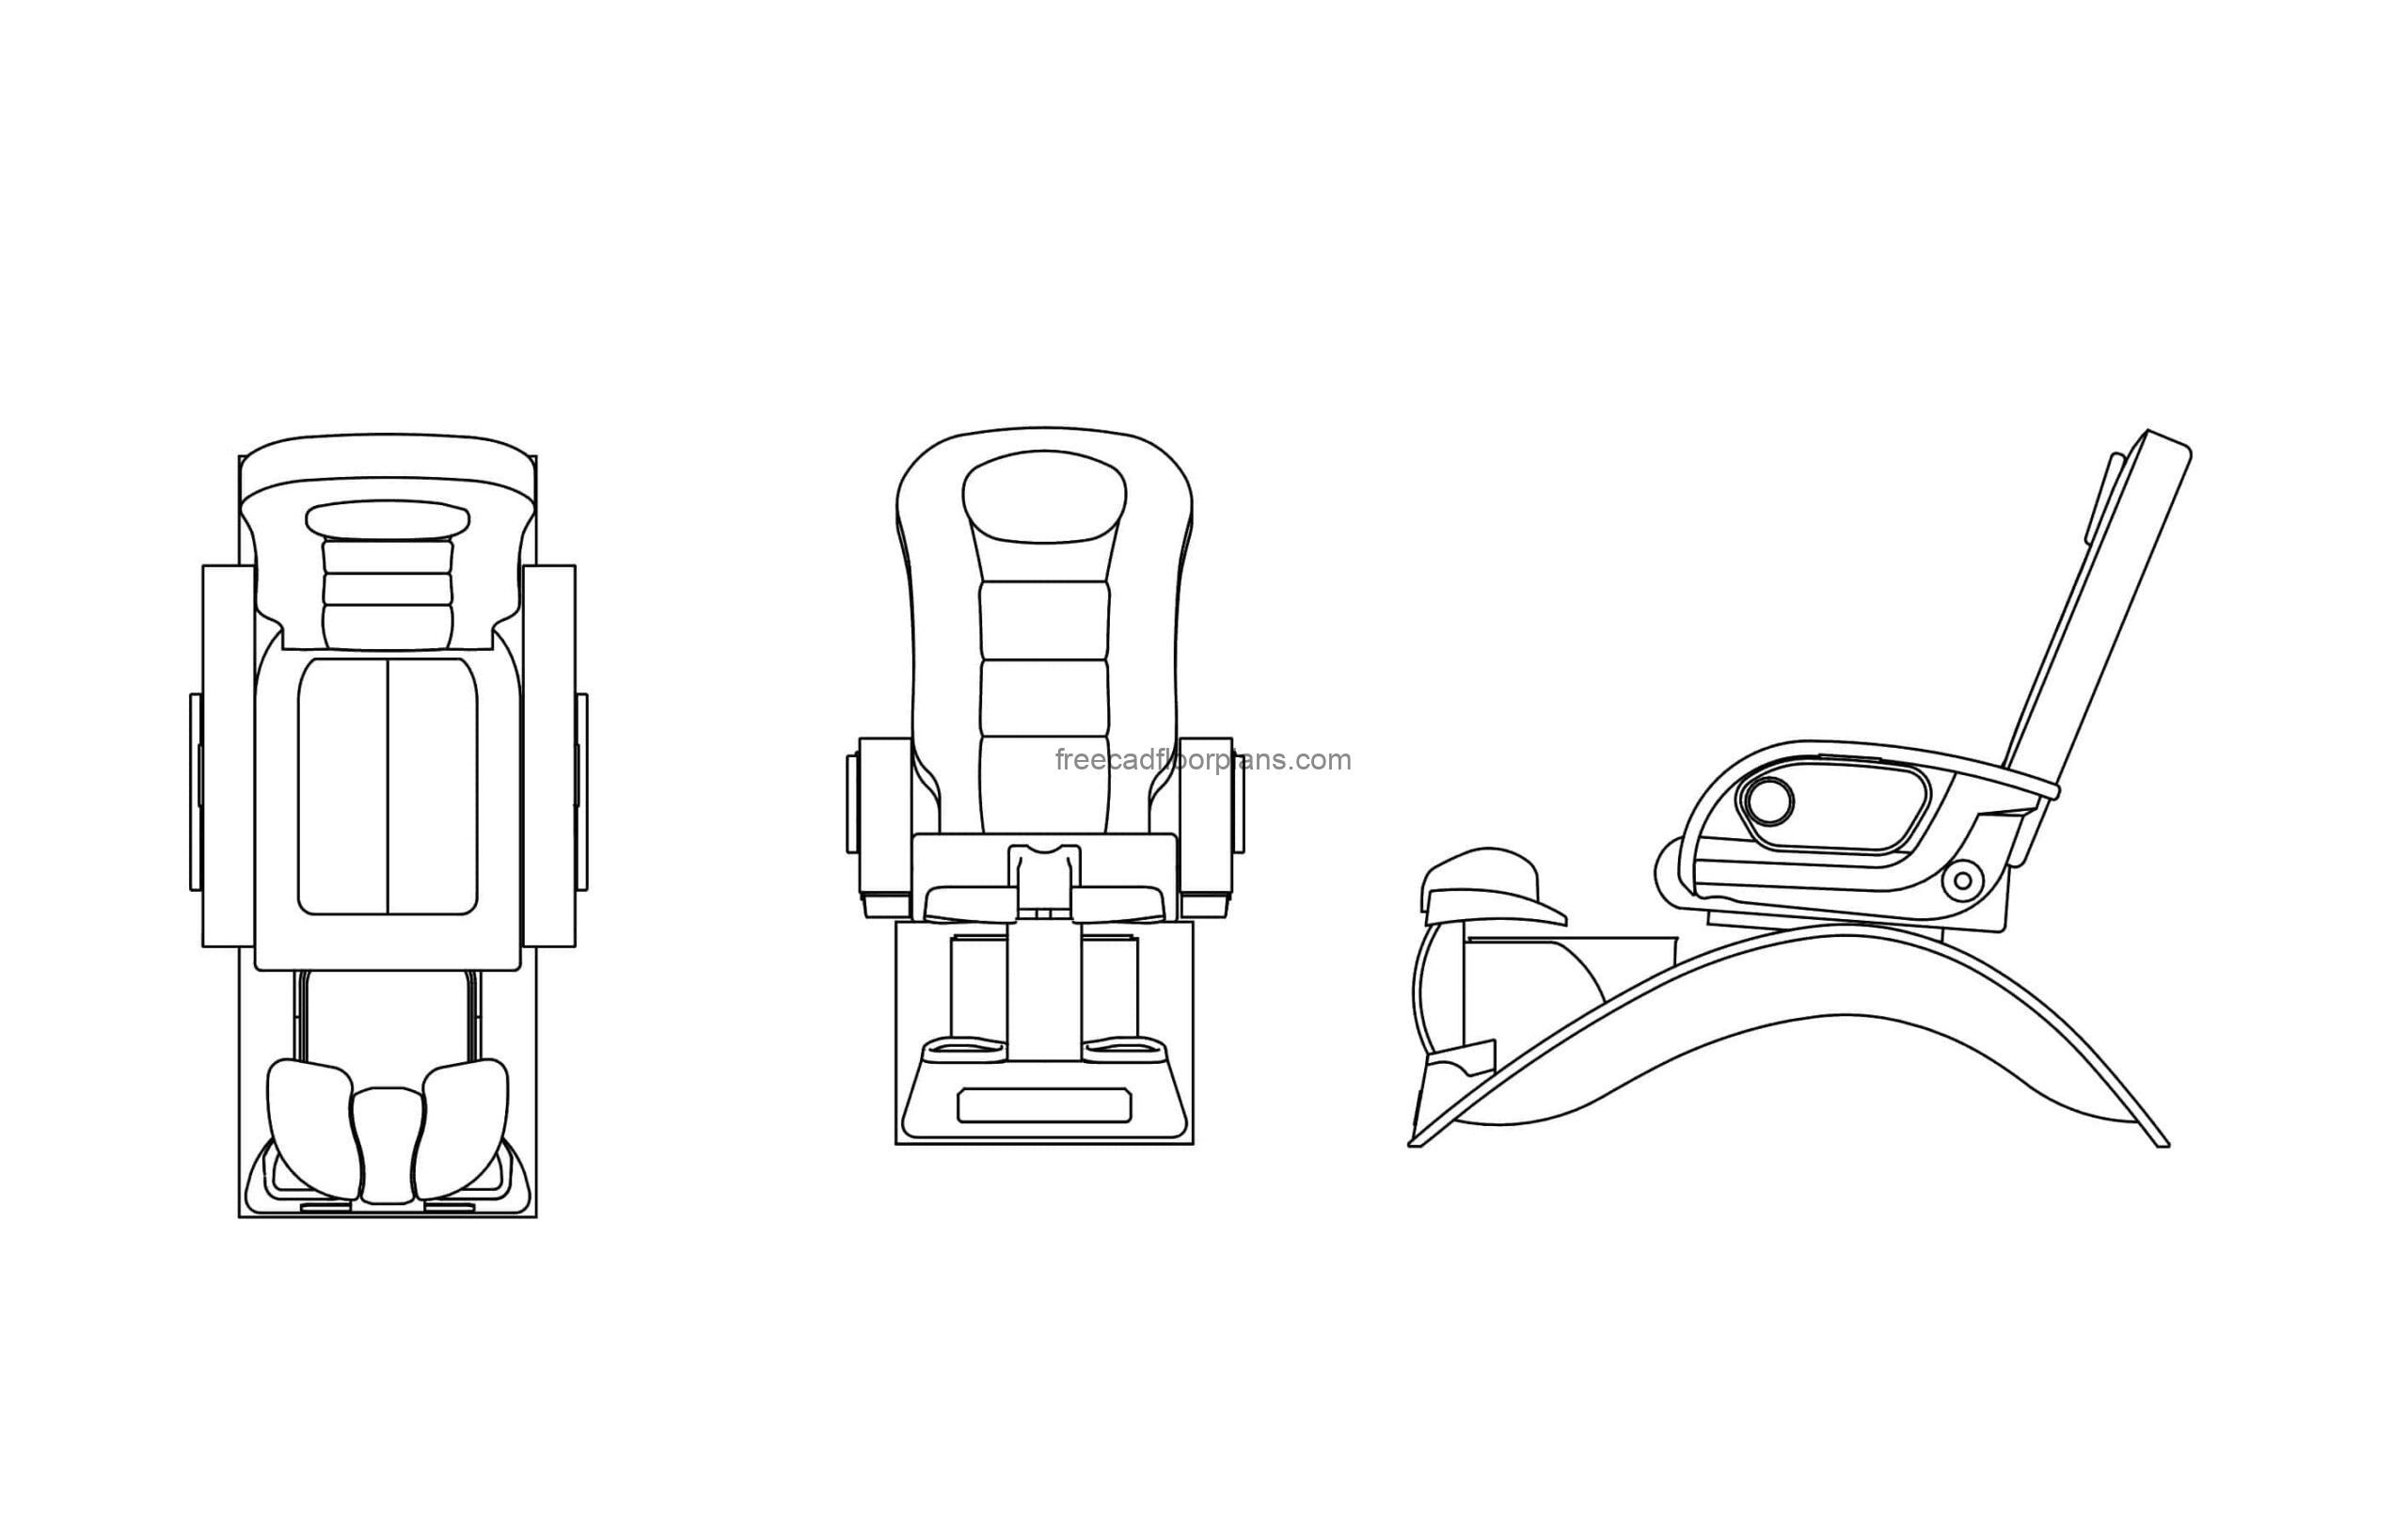 pedicure chair drawing model in dwg cad format for salon and spa blocks for free download